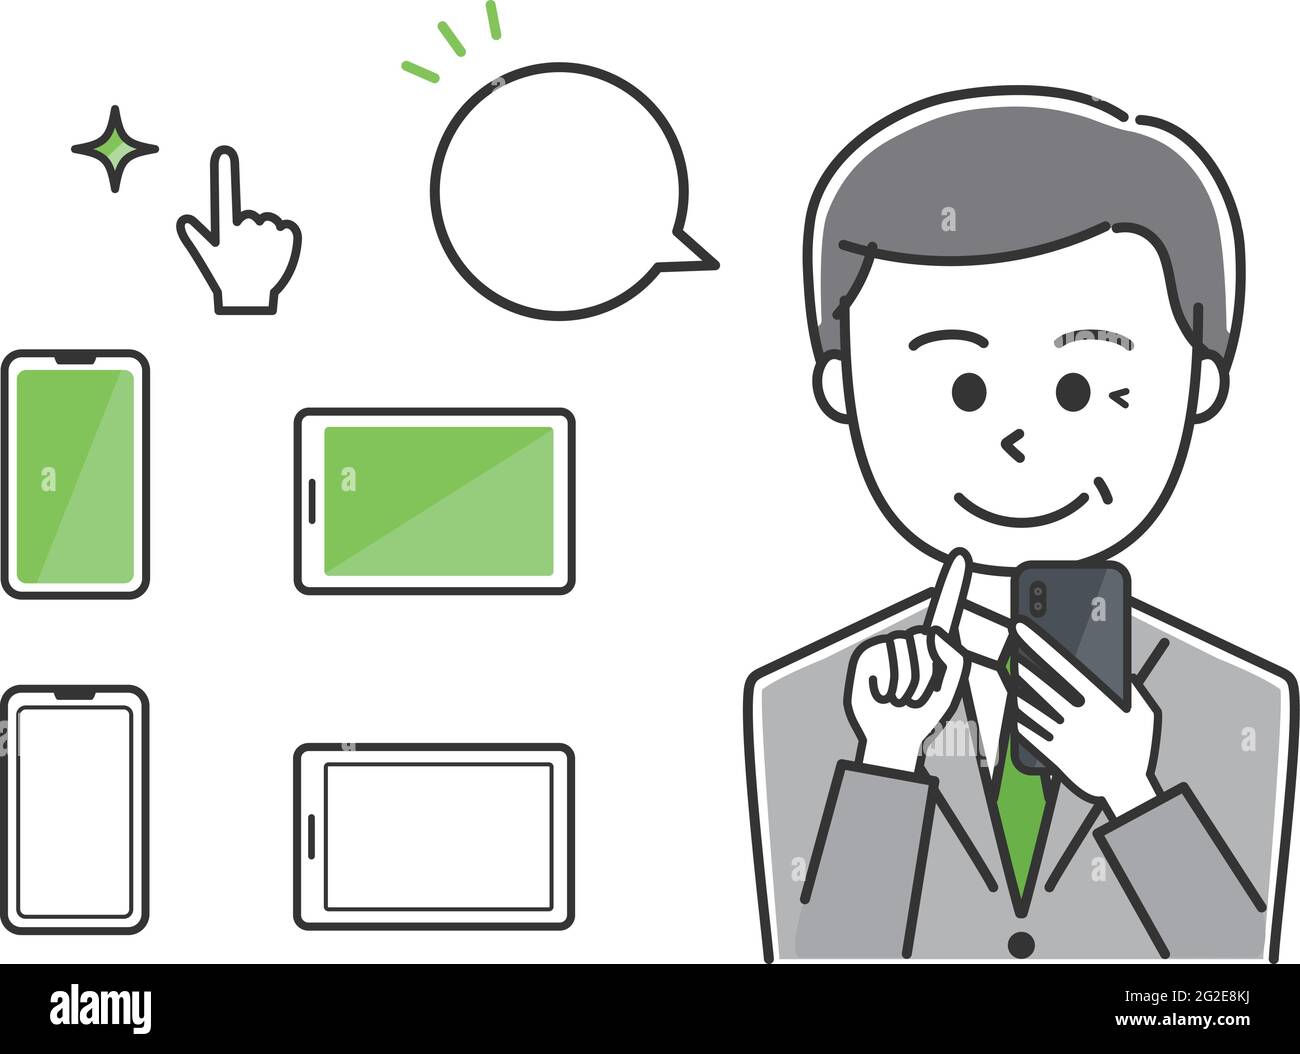 Man tapping a mobile phone with a speech bubble. Vector illustration